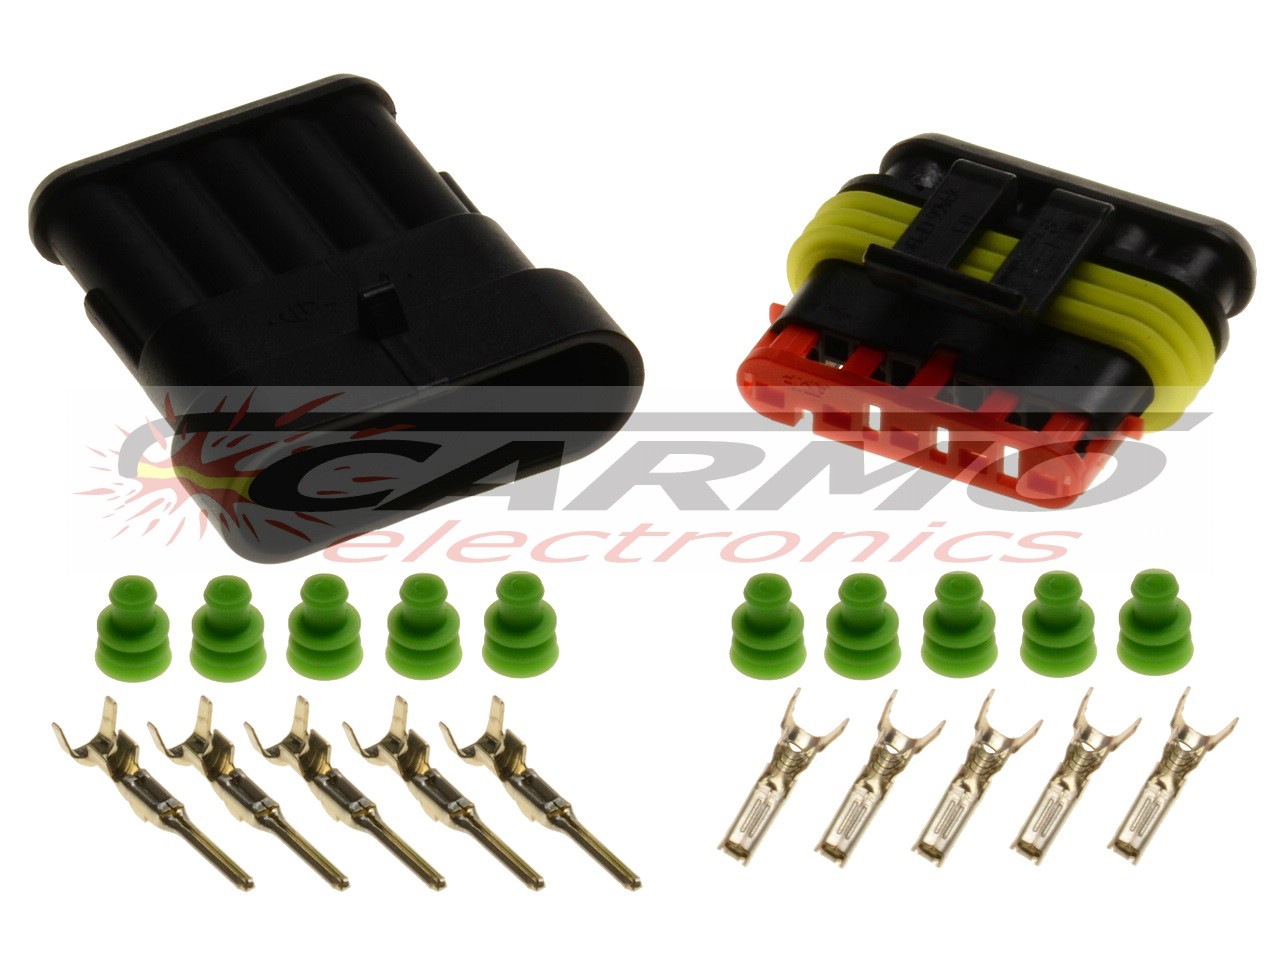 5 pin 1.5 superseal connector set - Click Image to Close